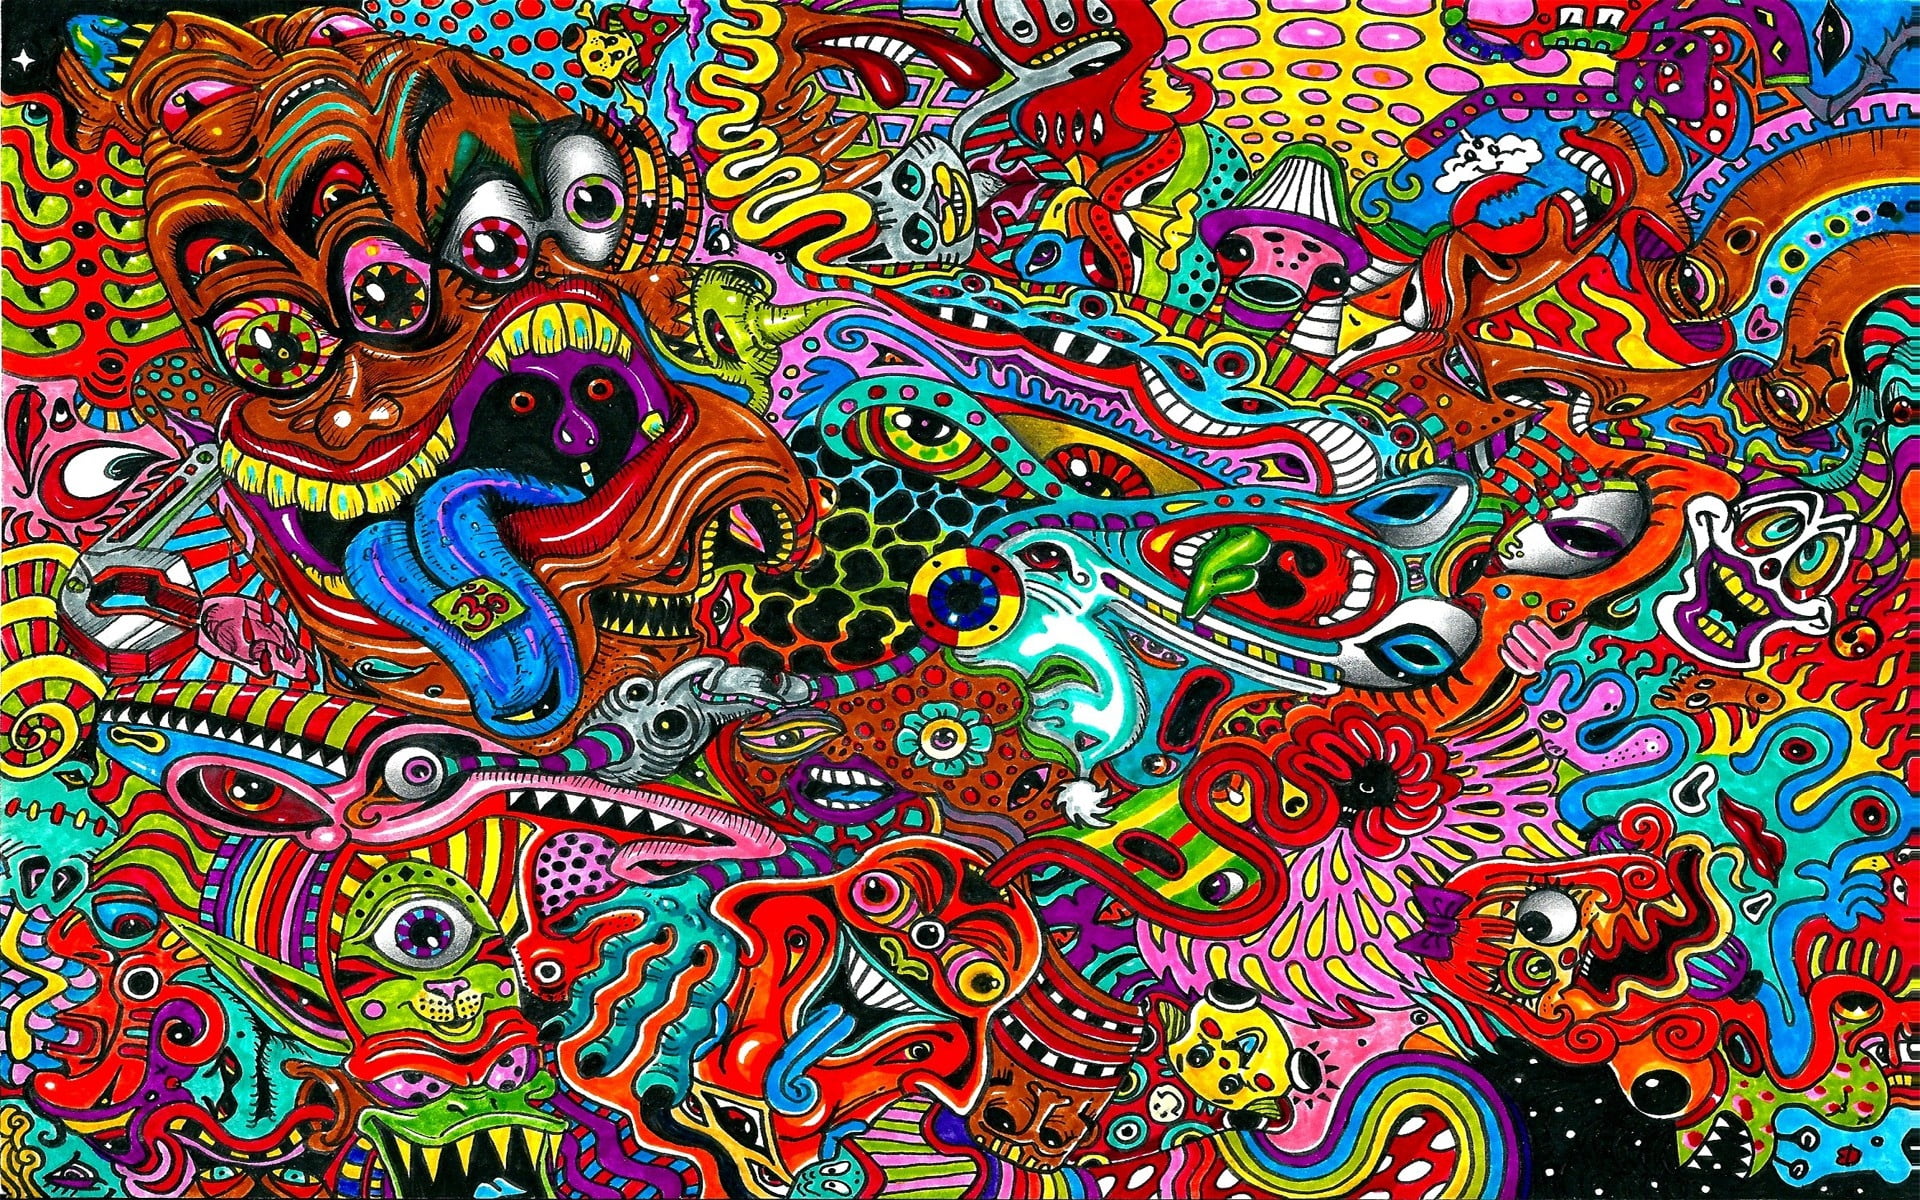 multicolored abstract painting, drawing, surreal, colorful, psychedelic